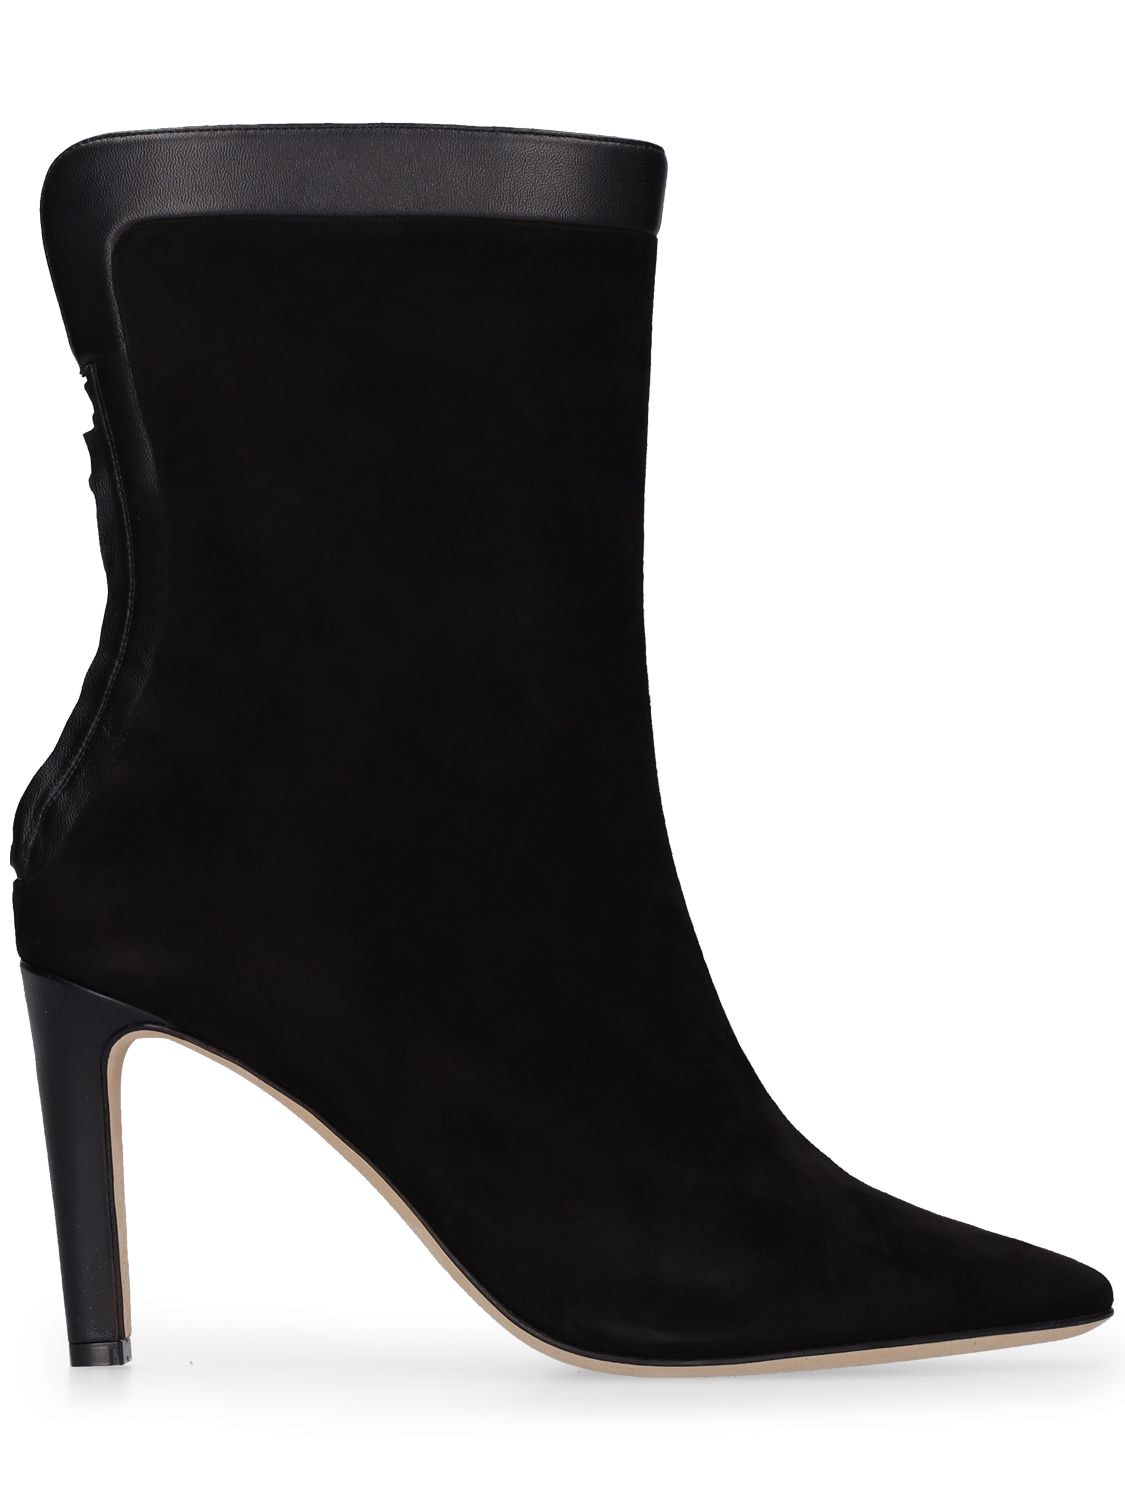 90mm Zufapla Suede Ankle Boots